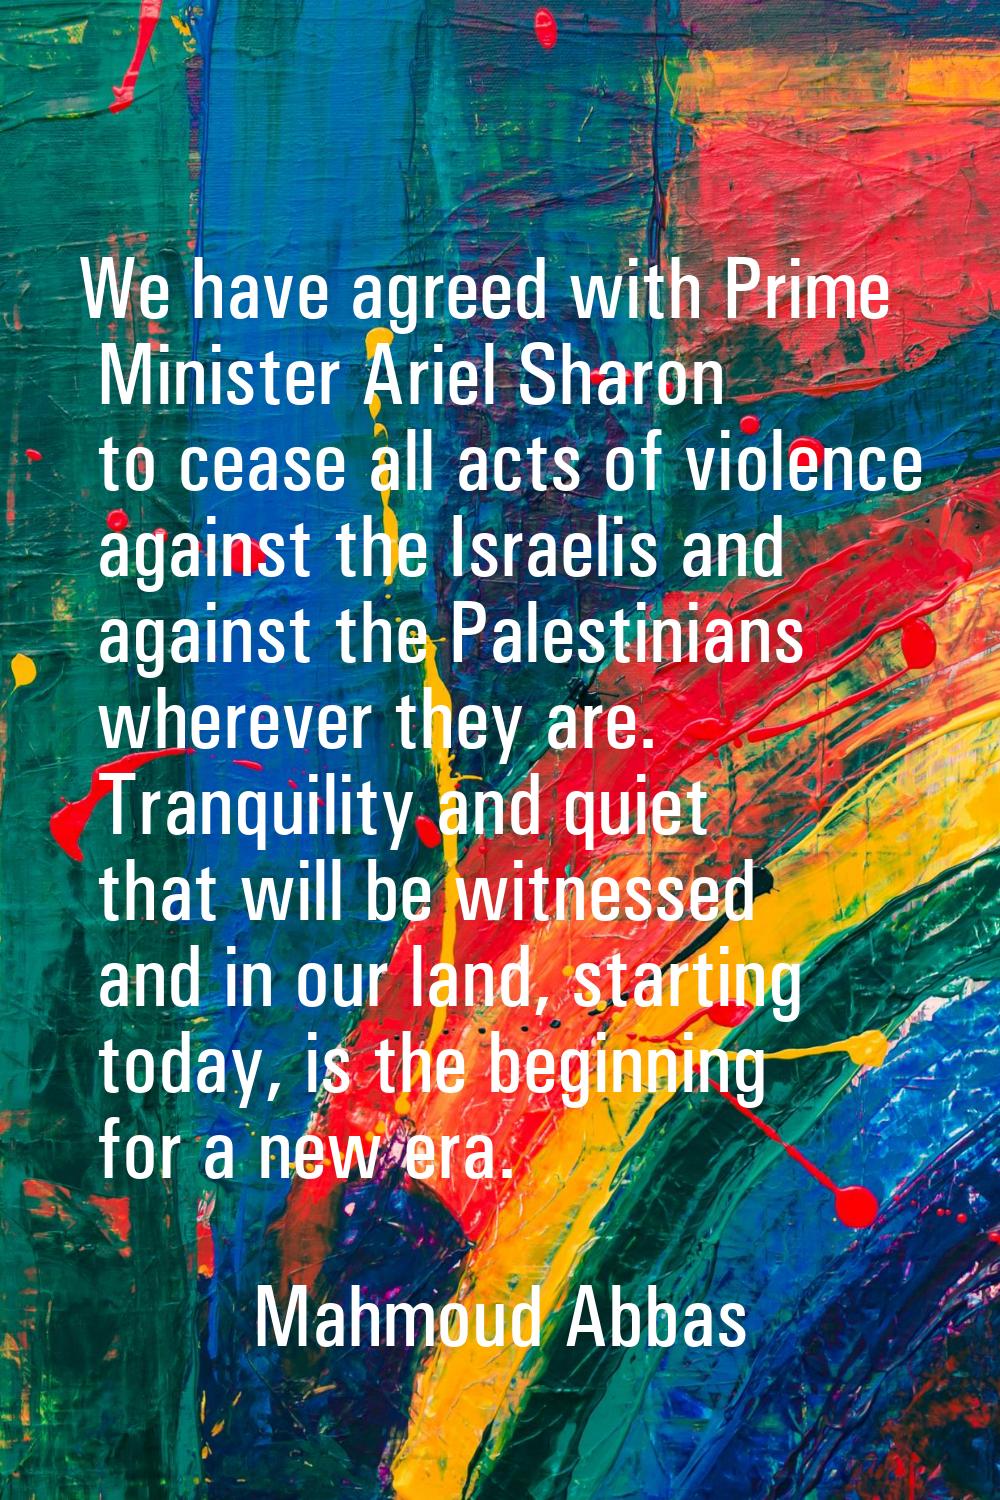 We have agreed with Prime Minister Ariel Sharon to cease all acts of violence against the Israelis 